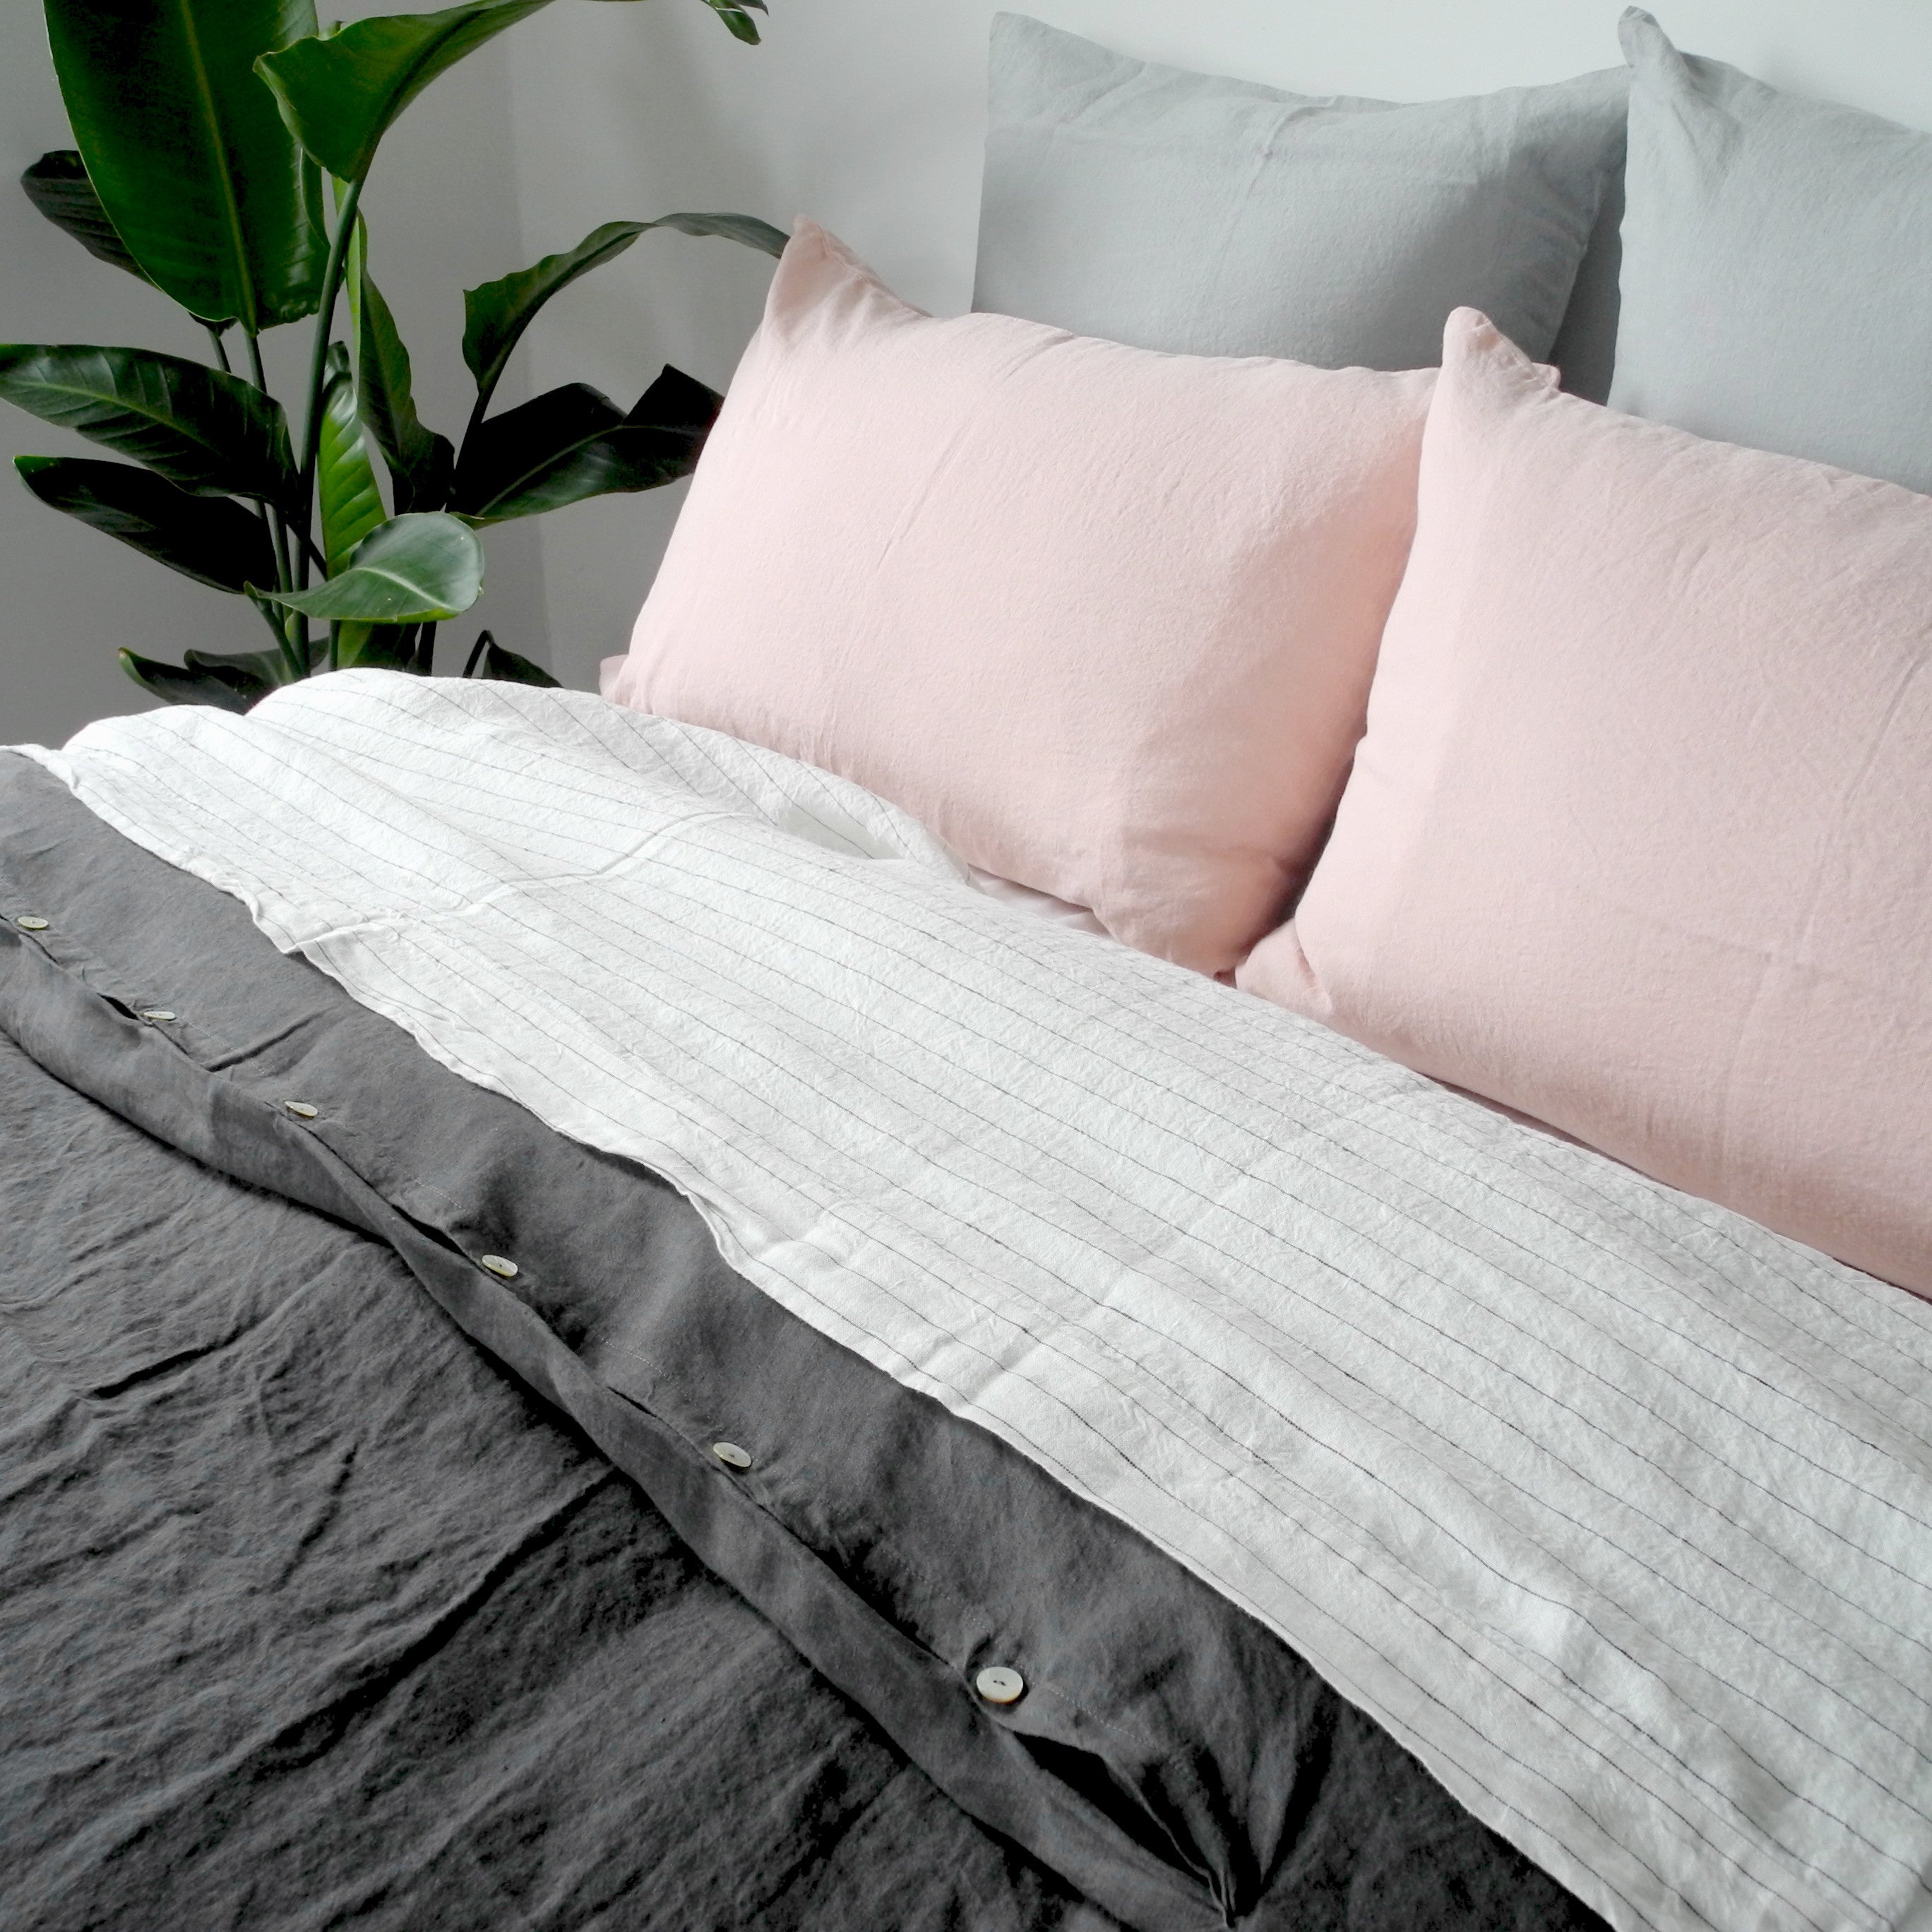 A Linge Particulier Linen Duvet in Storm Grey gives a charcoal and slate color to this duvet for a gray colorful linen bedding look from Collyer&#39;s Mansion